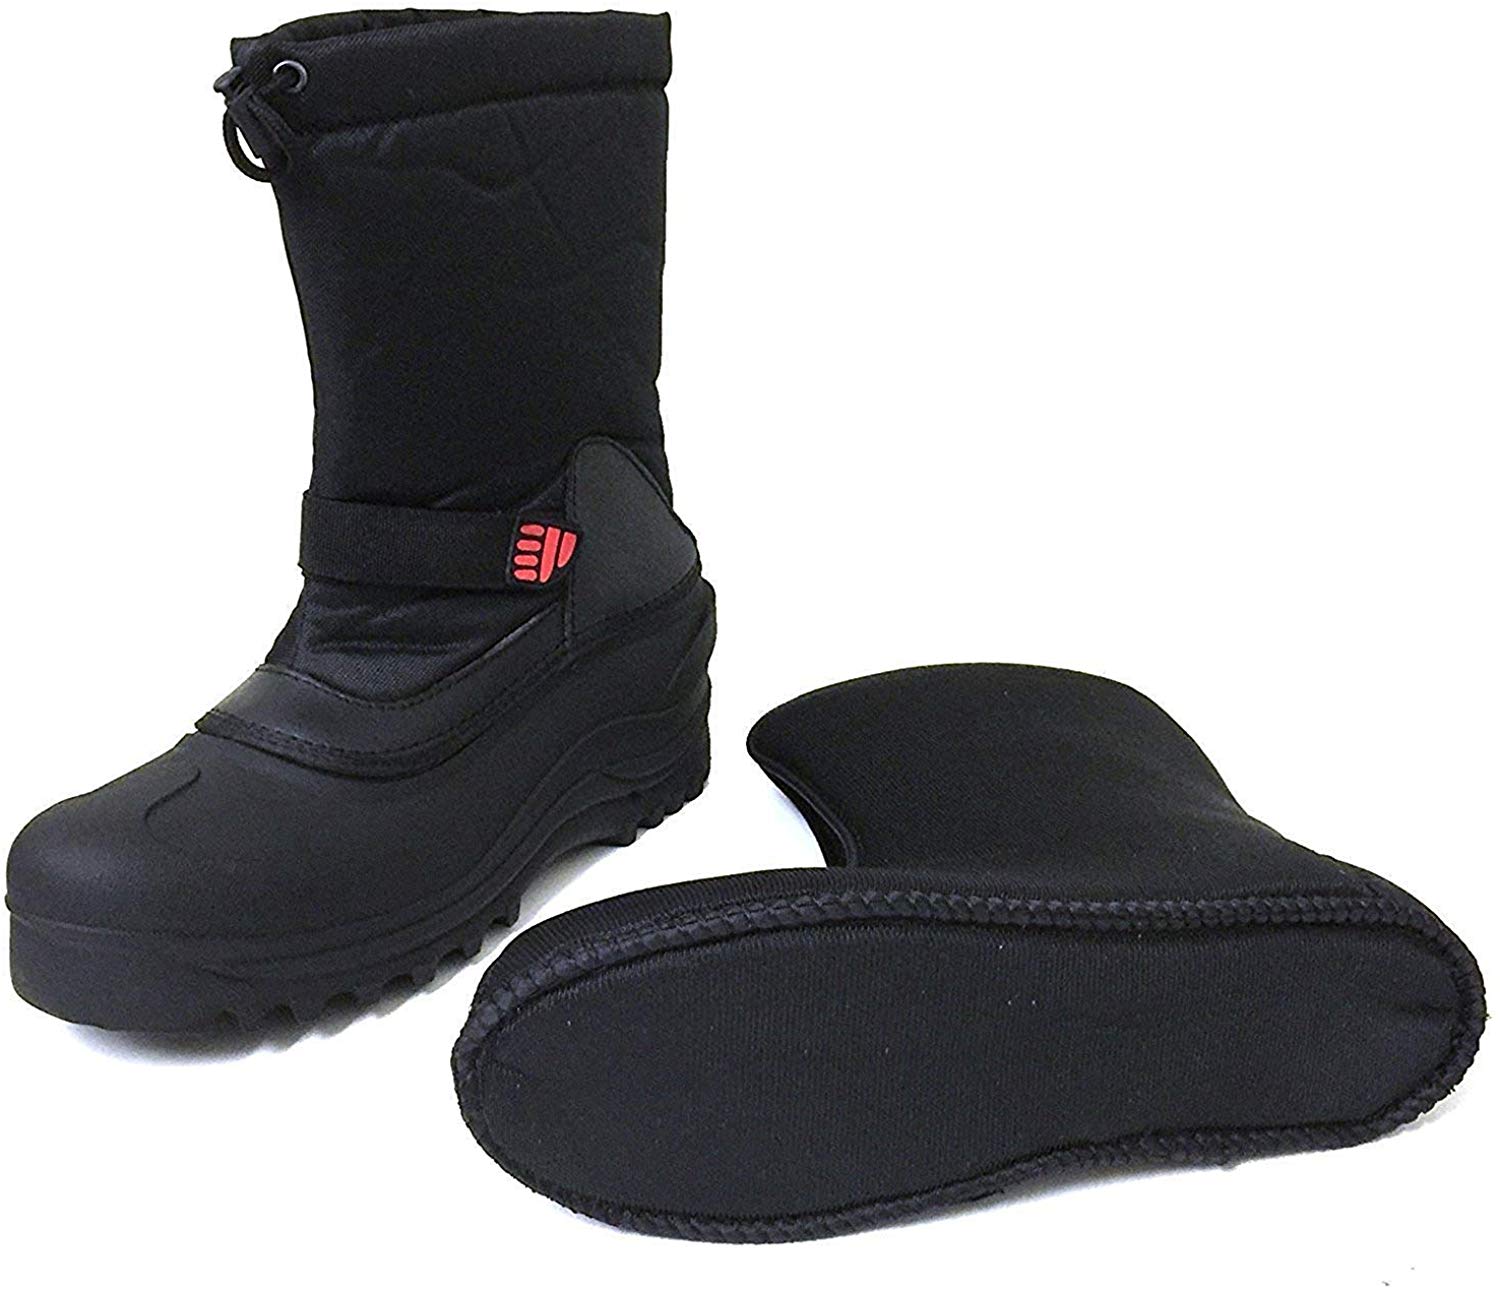 Men's Snow Boots - image 5 of 5